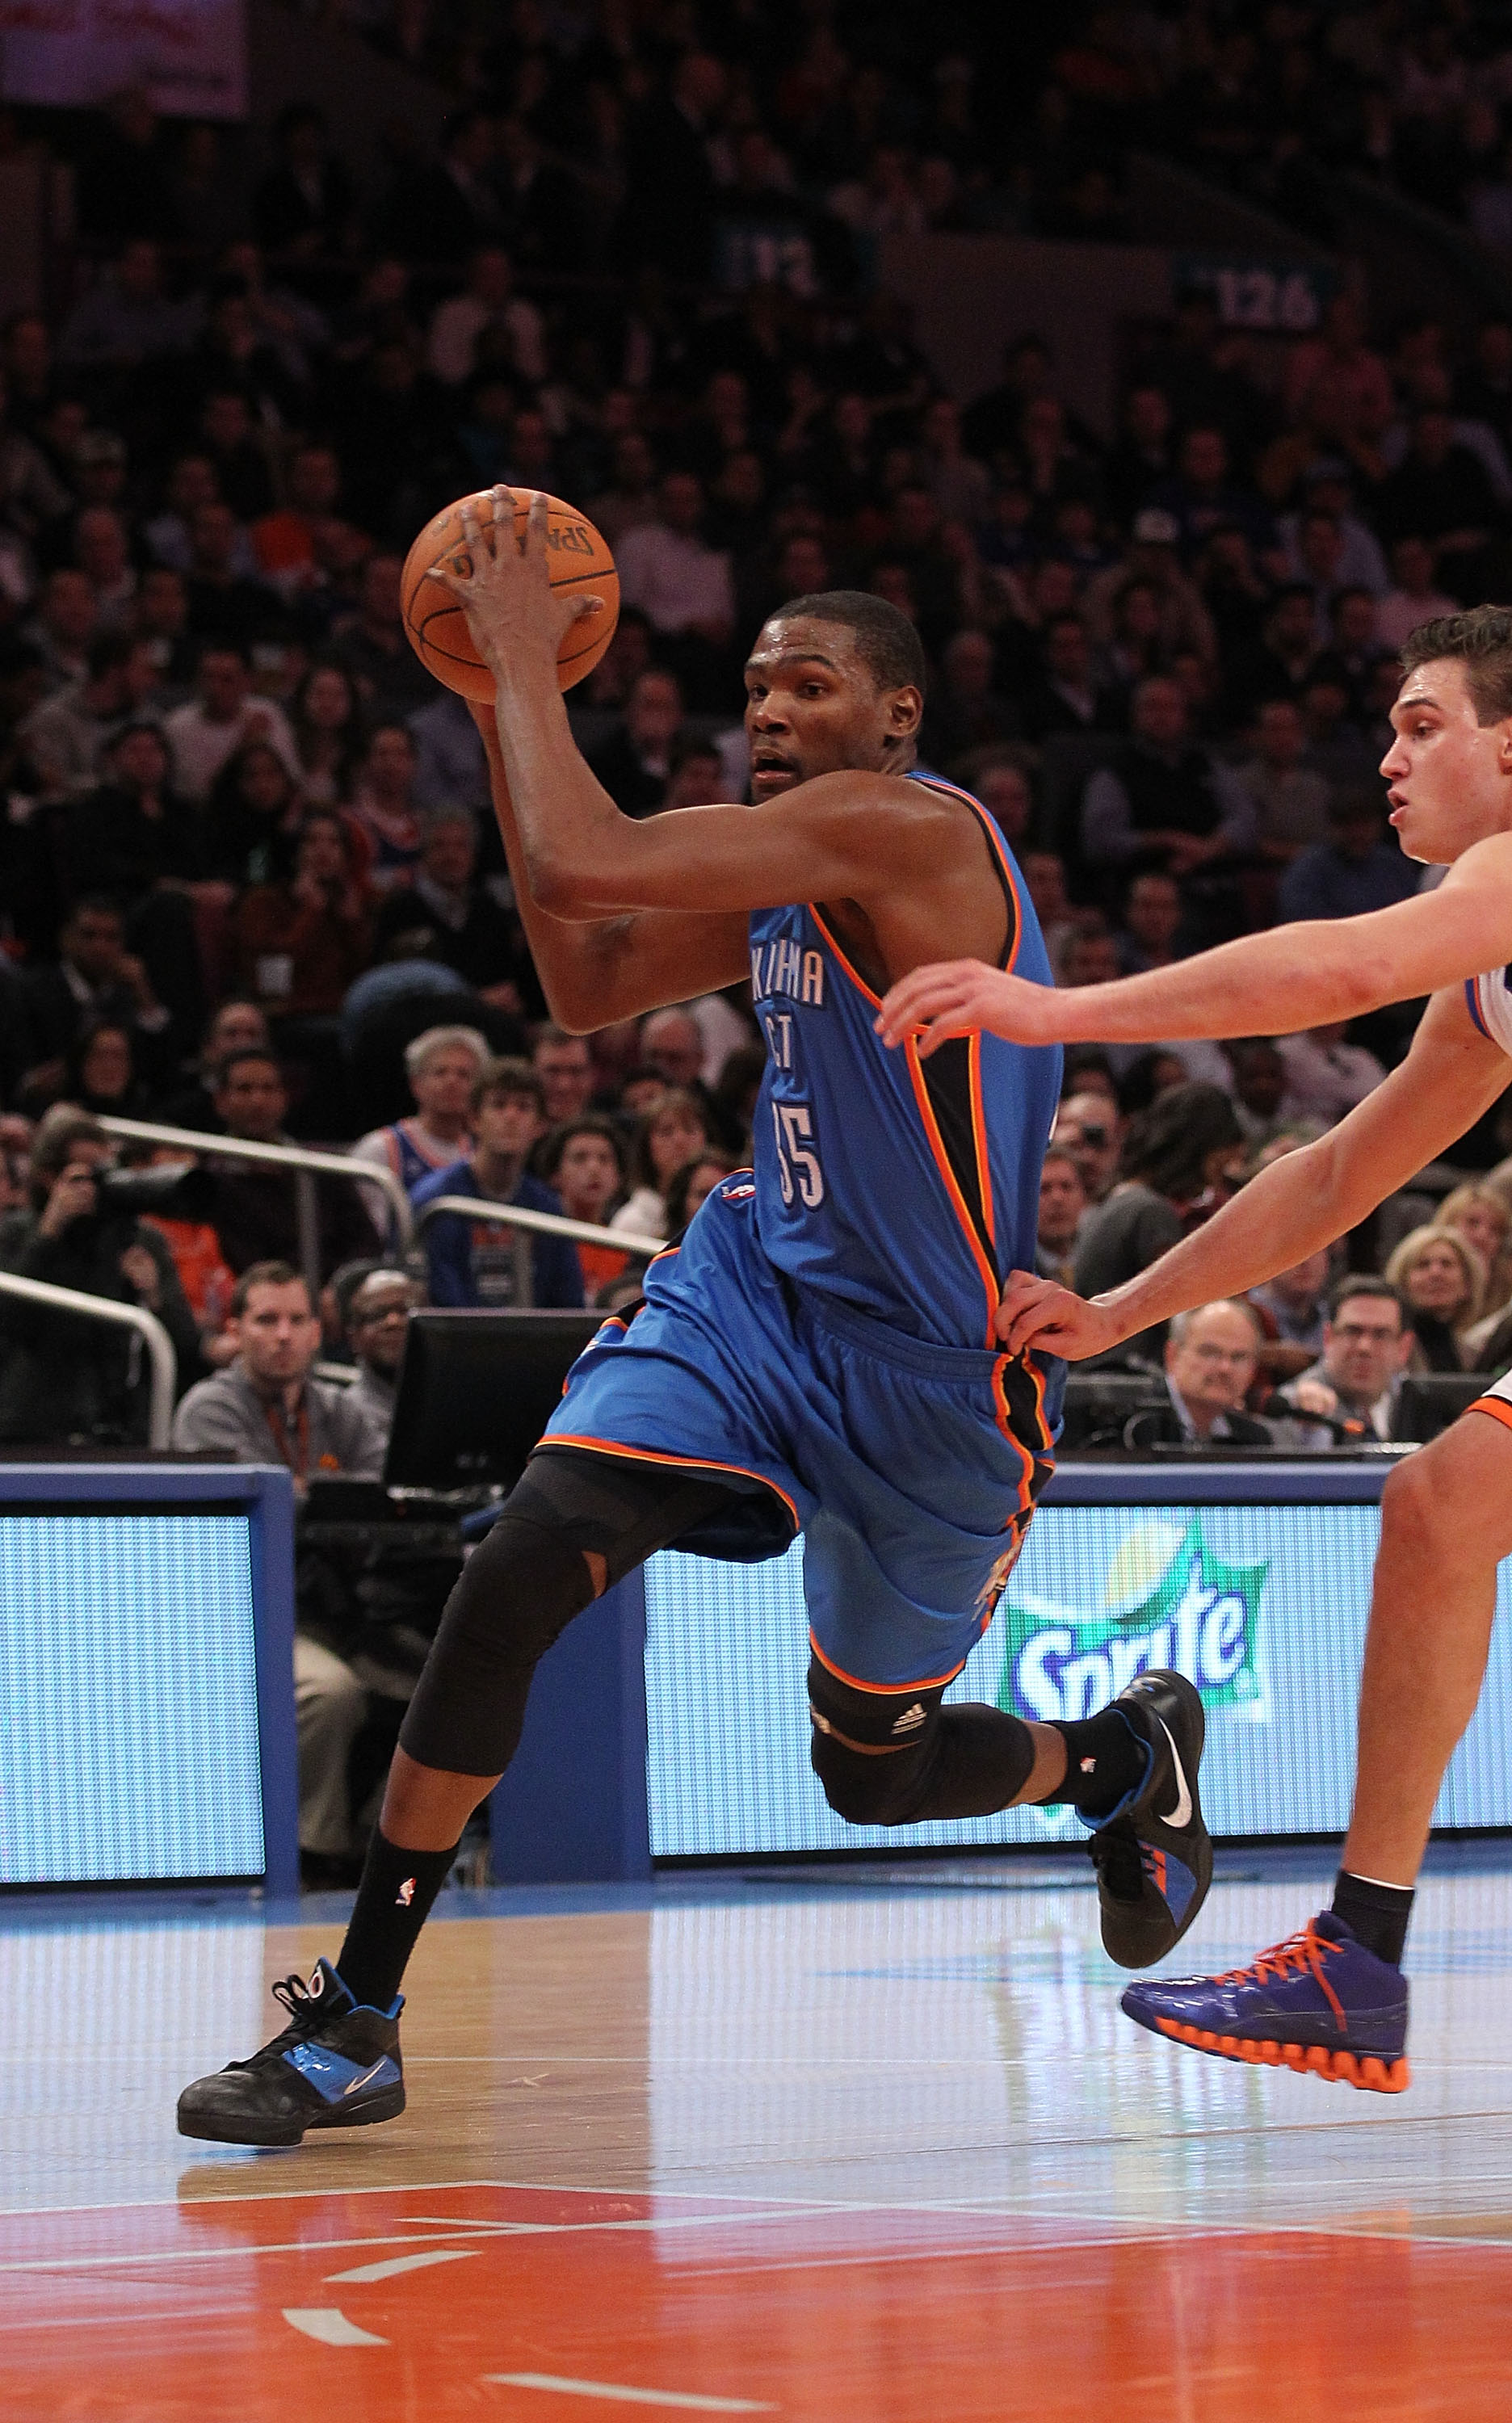 NEW YORK - DECEMBER 22:  Kevin Durant #35 of the Oklahoma City Thunder in action against the New York Knicks at Madison Square Garden on December 22, 2010 in New York, New York.   NOTE TO USER: User expressly acknowledges and agrees that, by downloading a